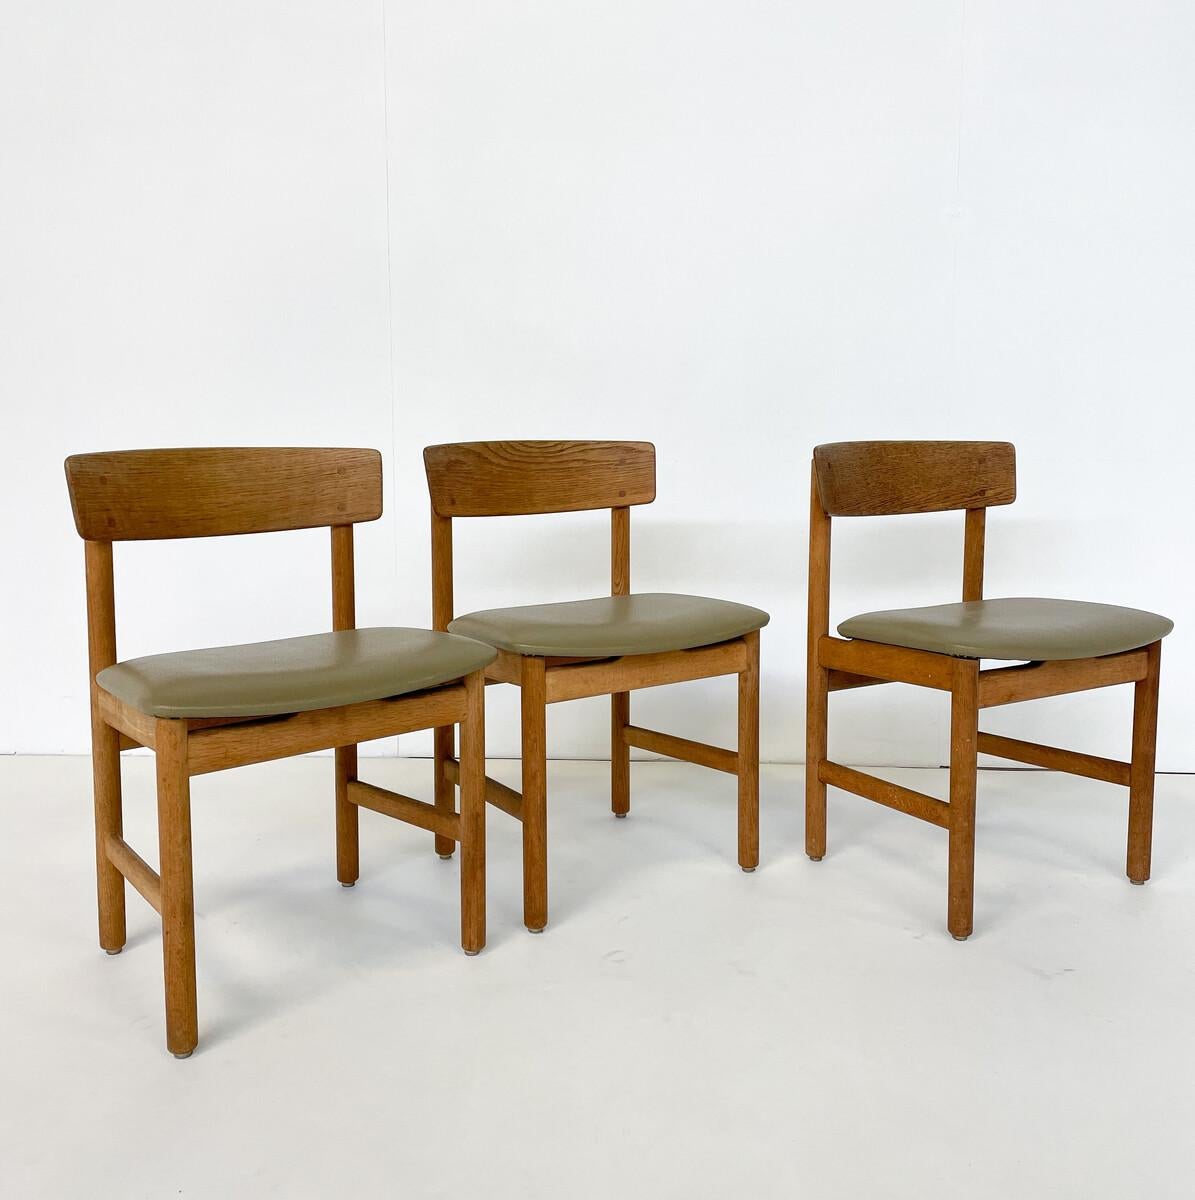 Wood Set of 3 Dining Chairs Model 236 by Børge Mogensen, Denmark, 1950s For Sale